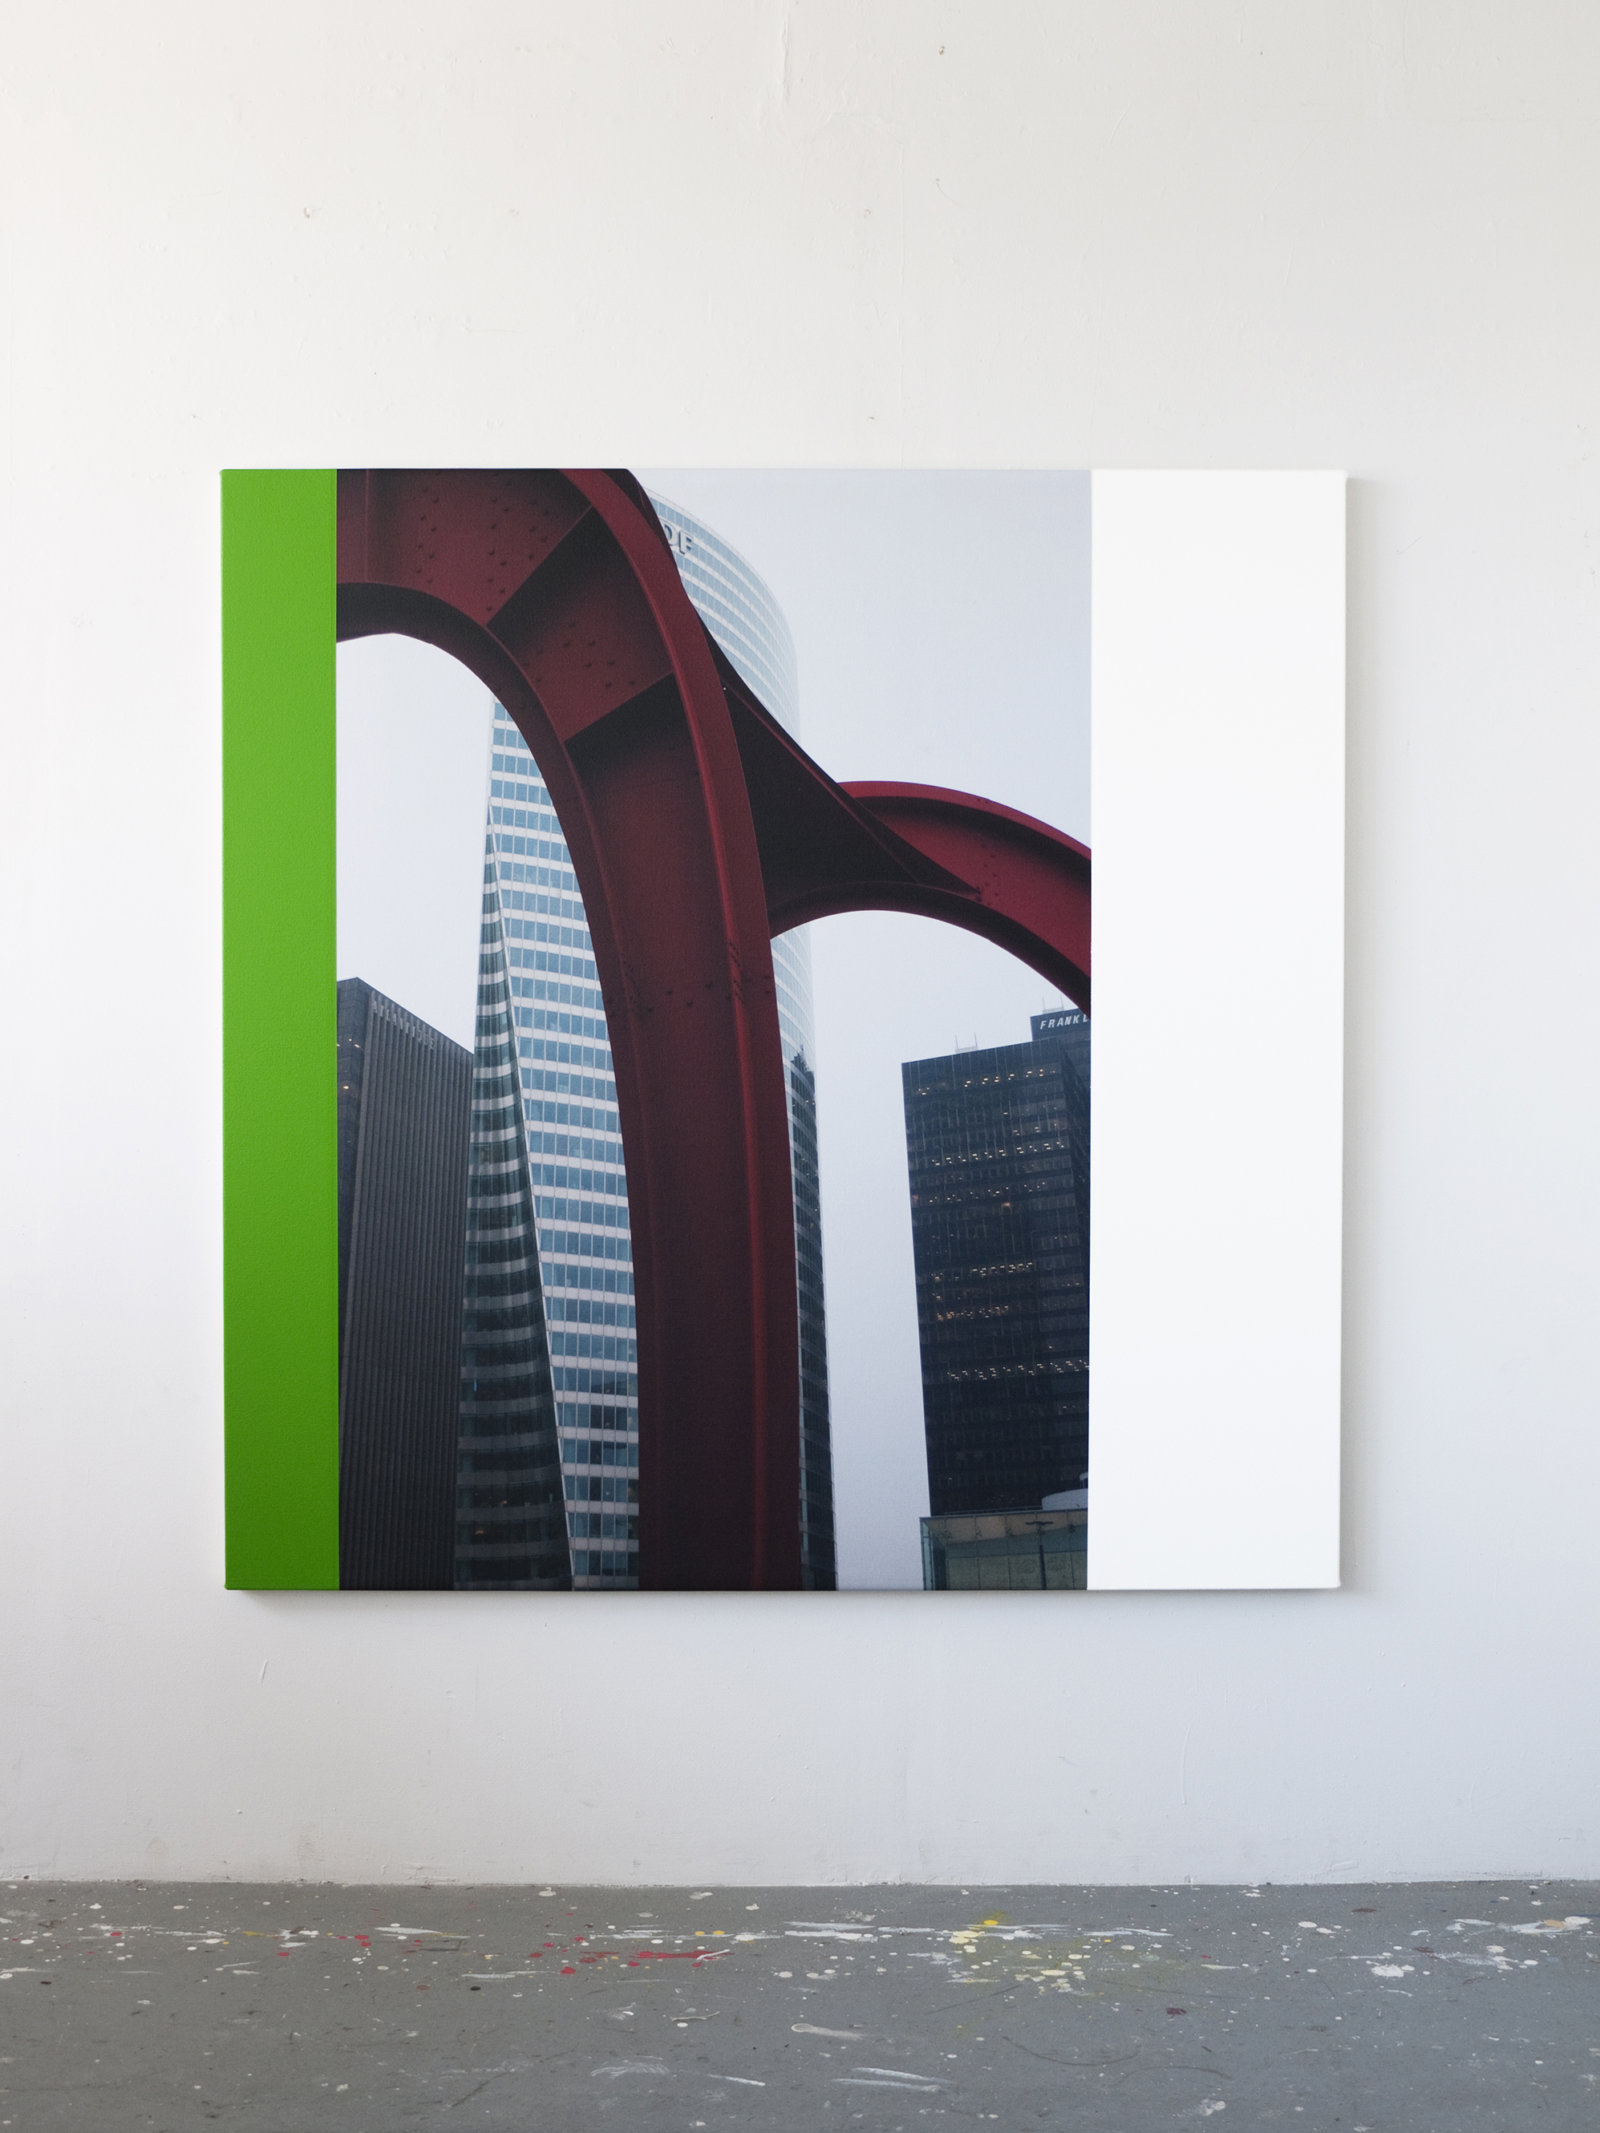 Ian Wallace, Abstract Composition (La Défense, Paris) III, 2011, photolaminate with acrylic on canvas, 60 x 60 in. (152 x 152 cm)